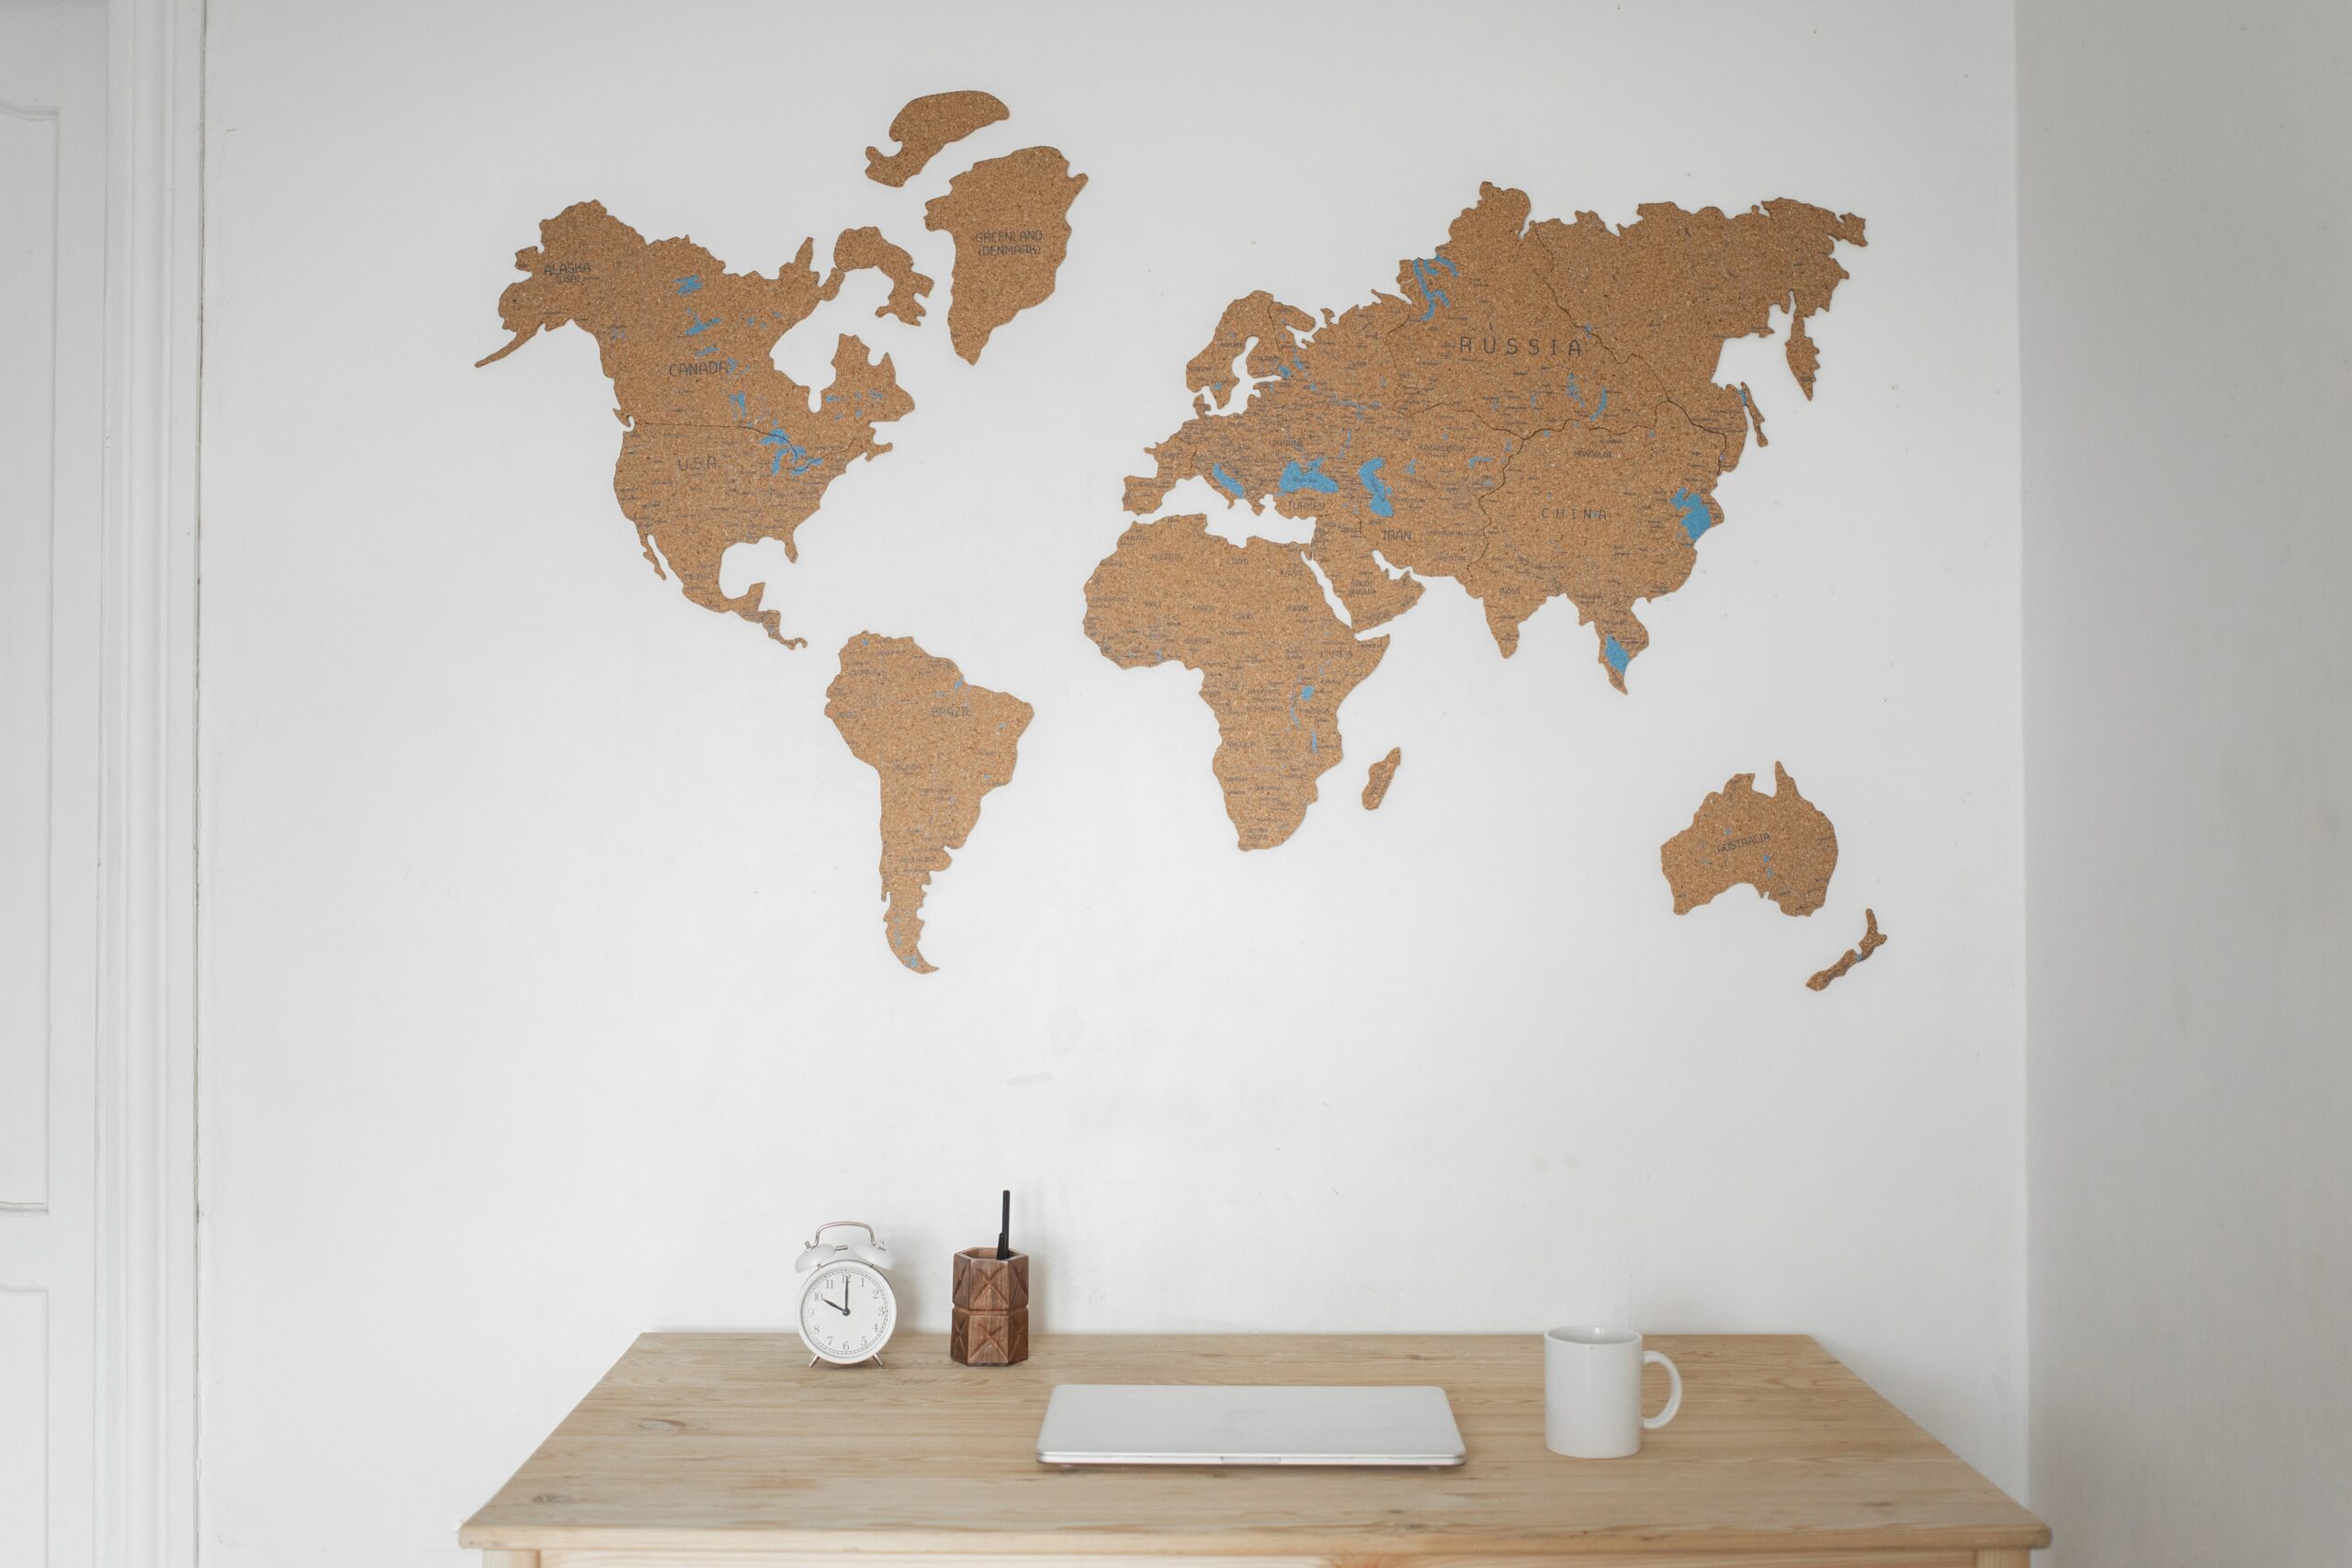 A cork map of the world posted onto a white wall with a desk below